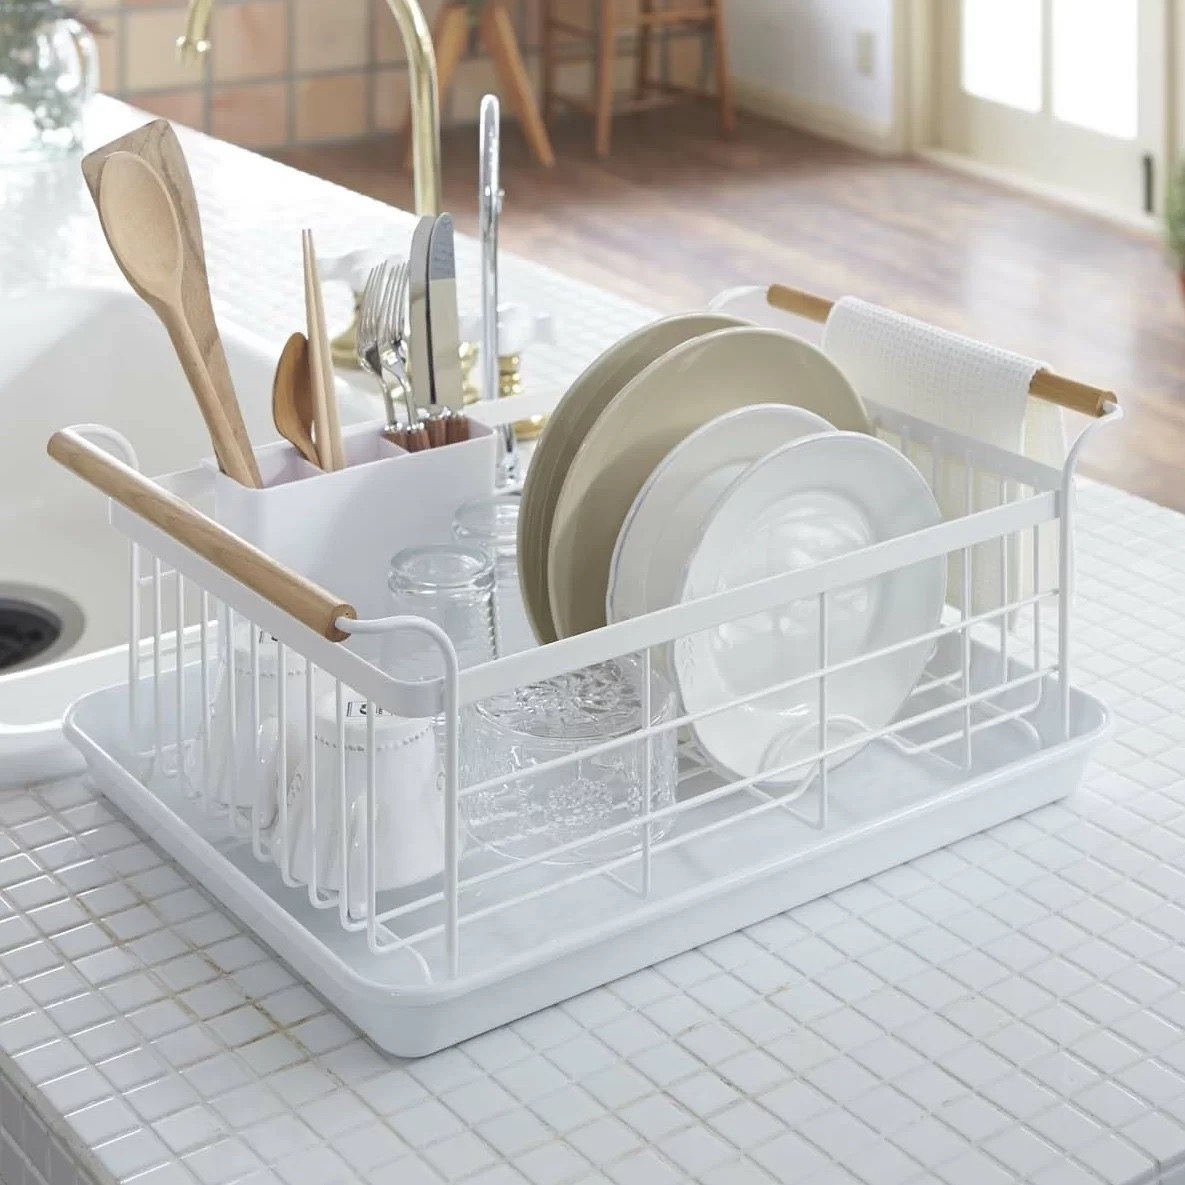 a white dish drainer rack with wooden handles